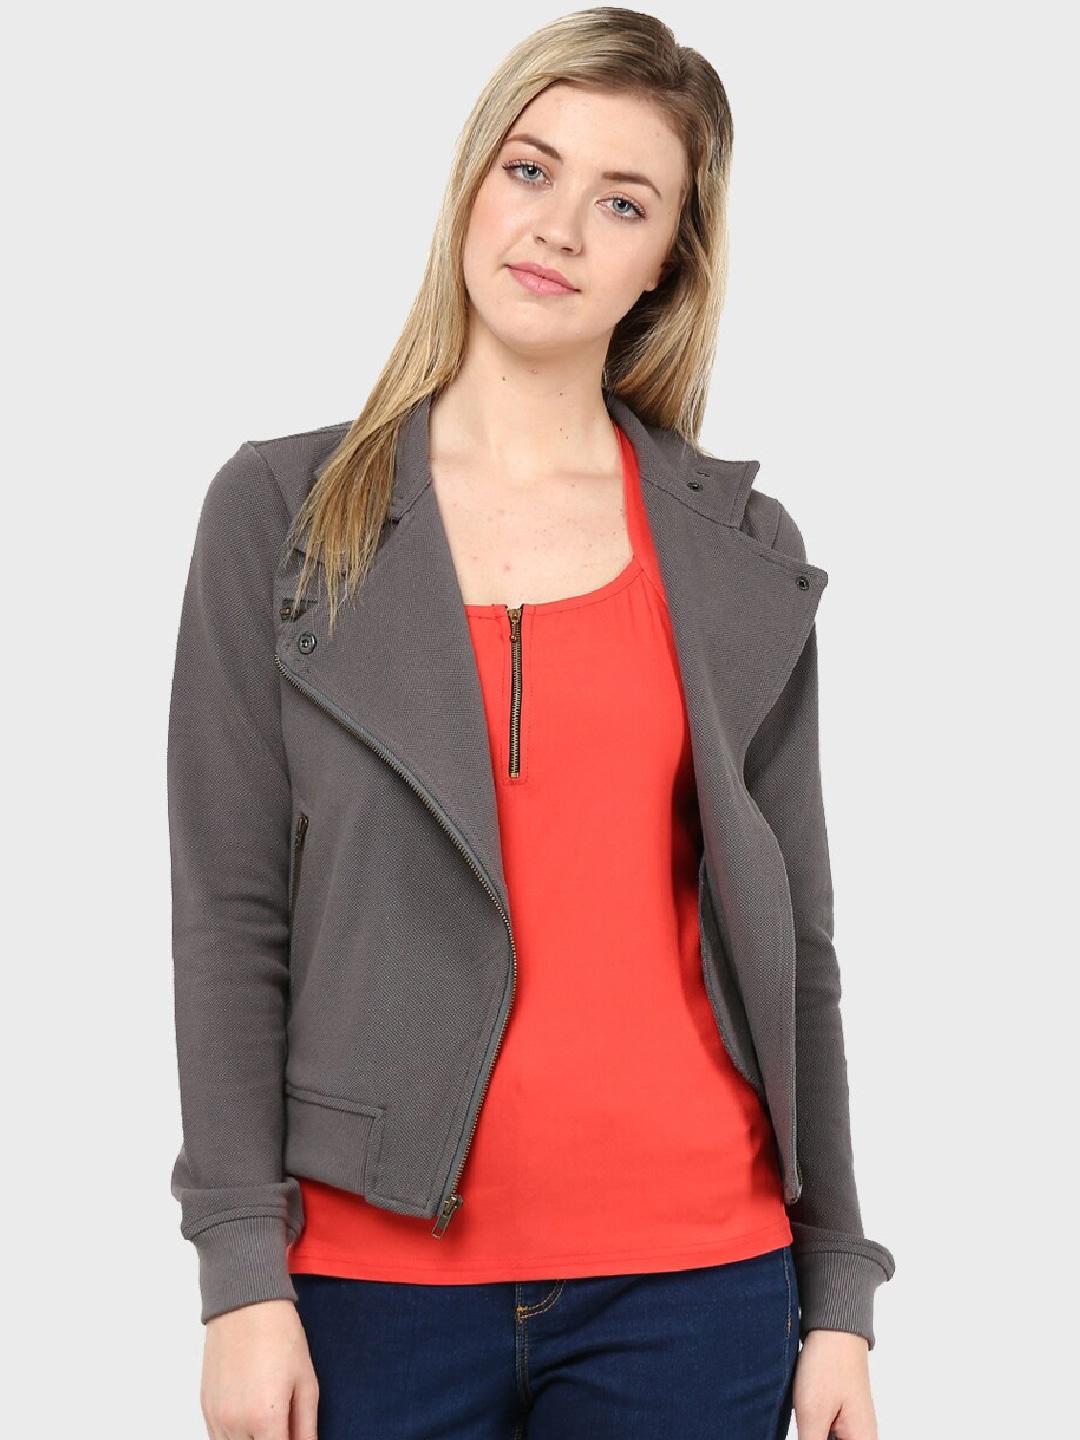 hypernation women solid cotton long sleeves tailored jacket